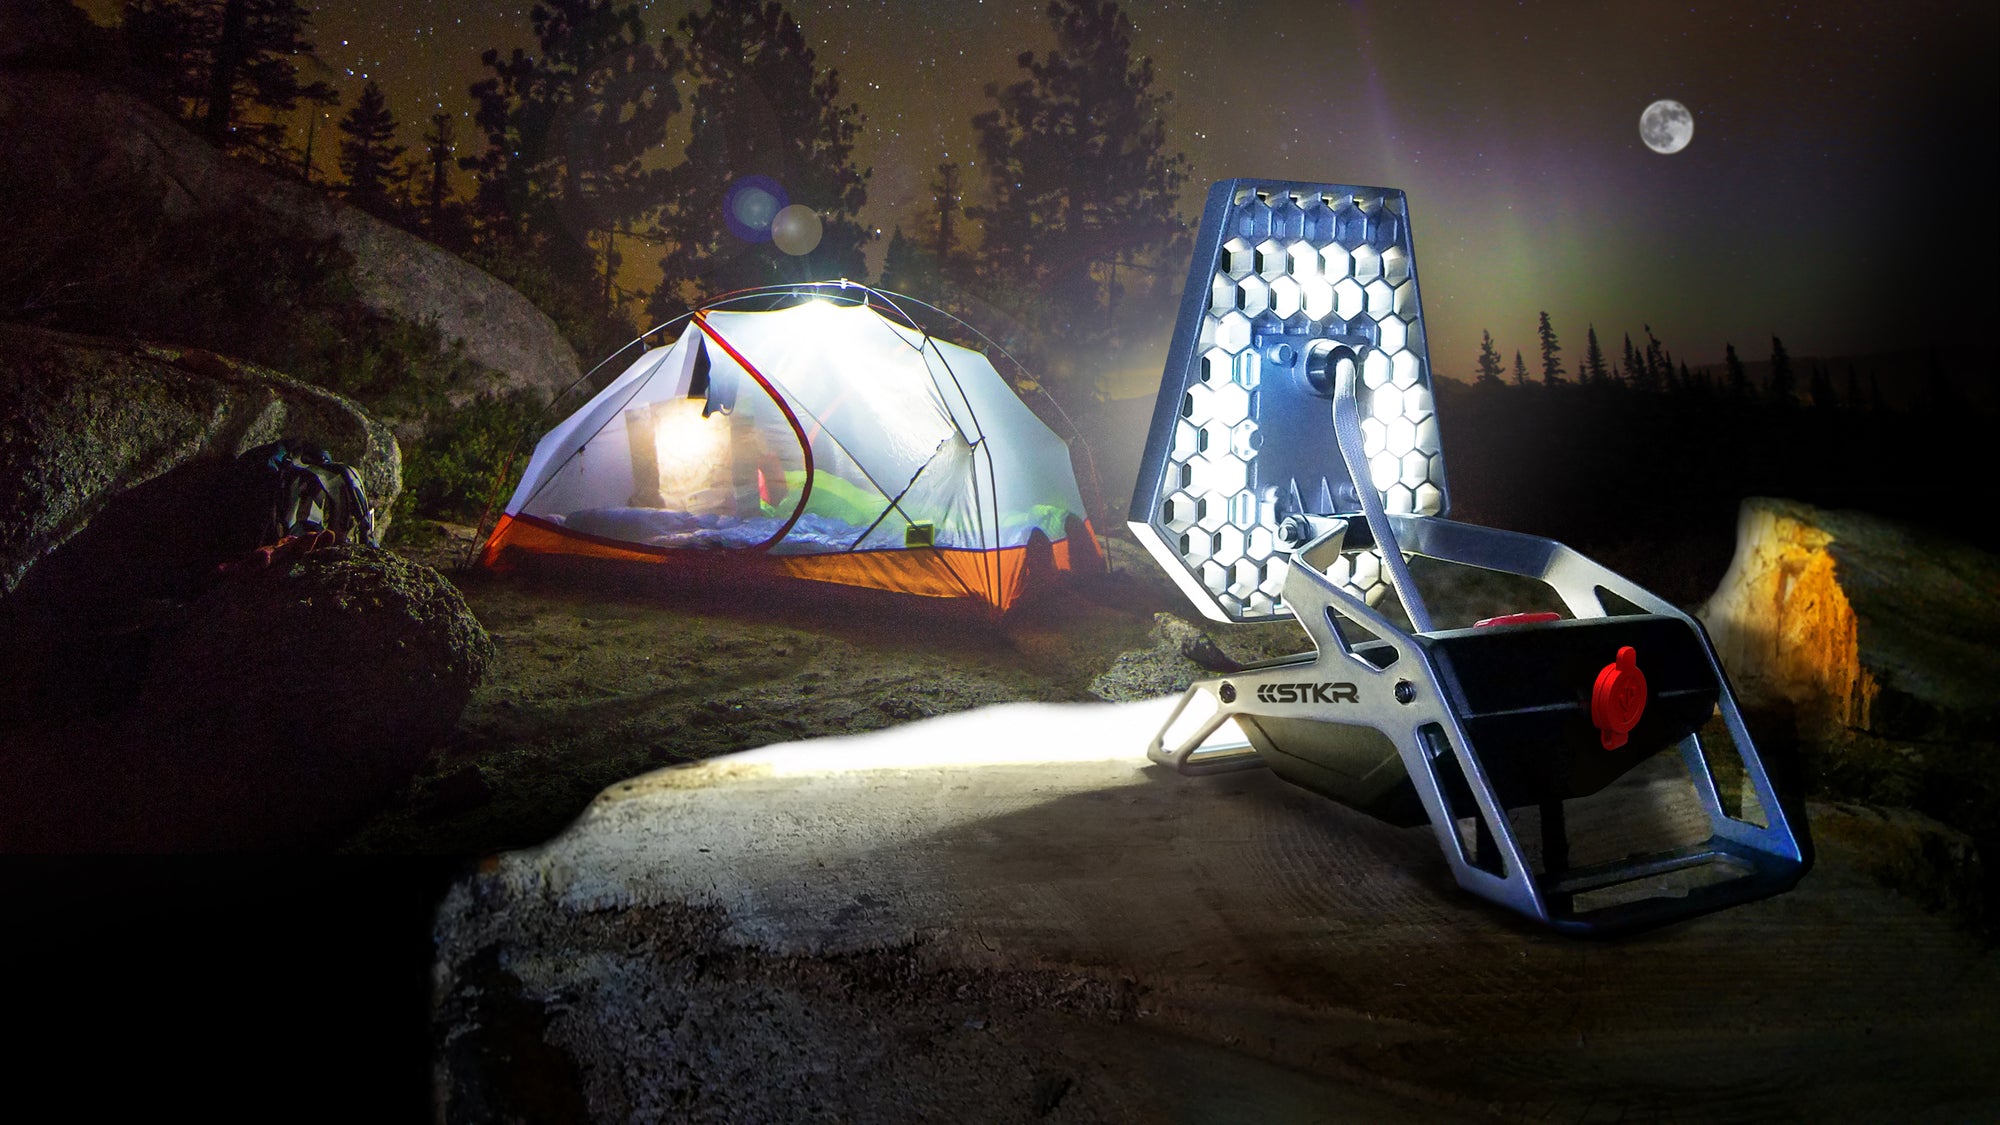 What Are The Best Lights For Camping?